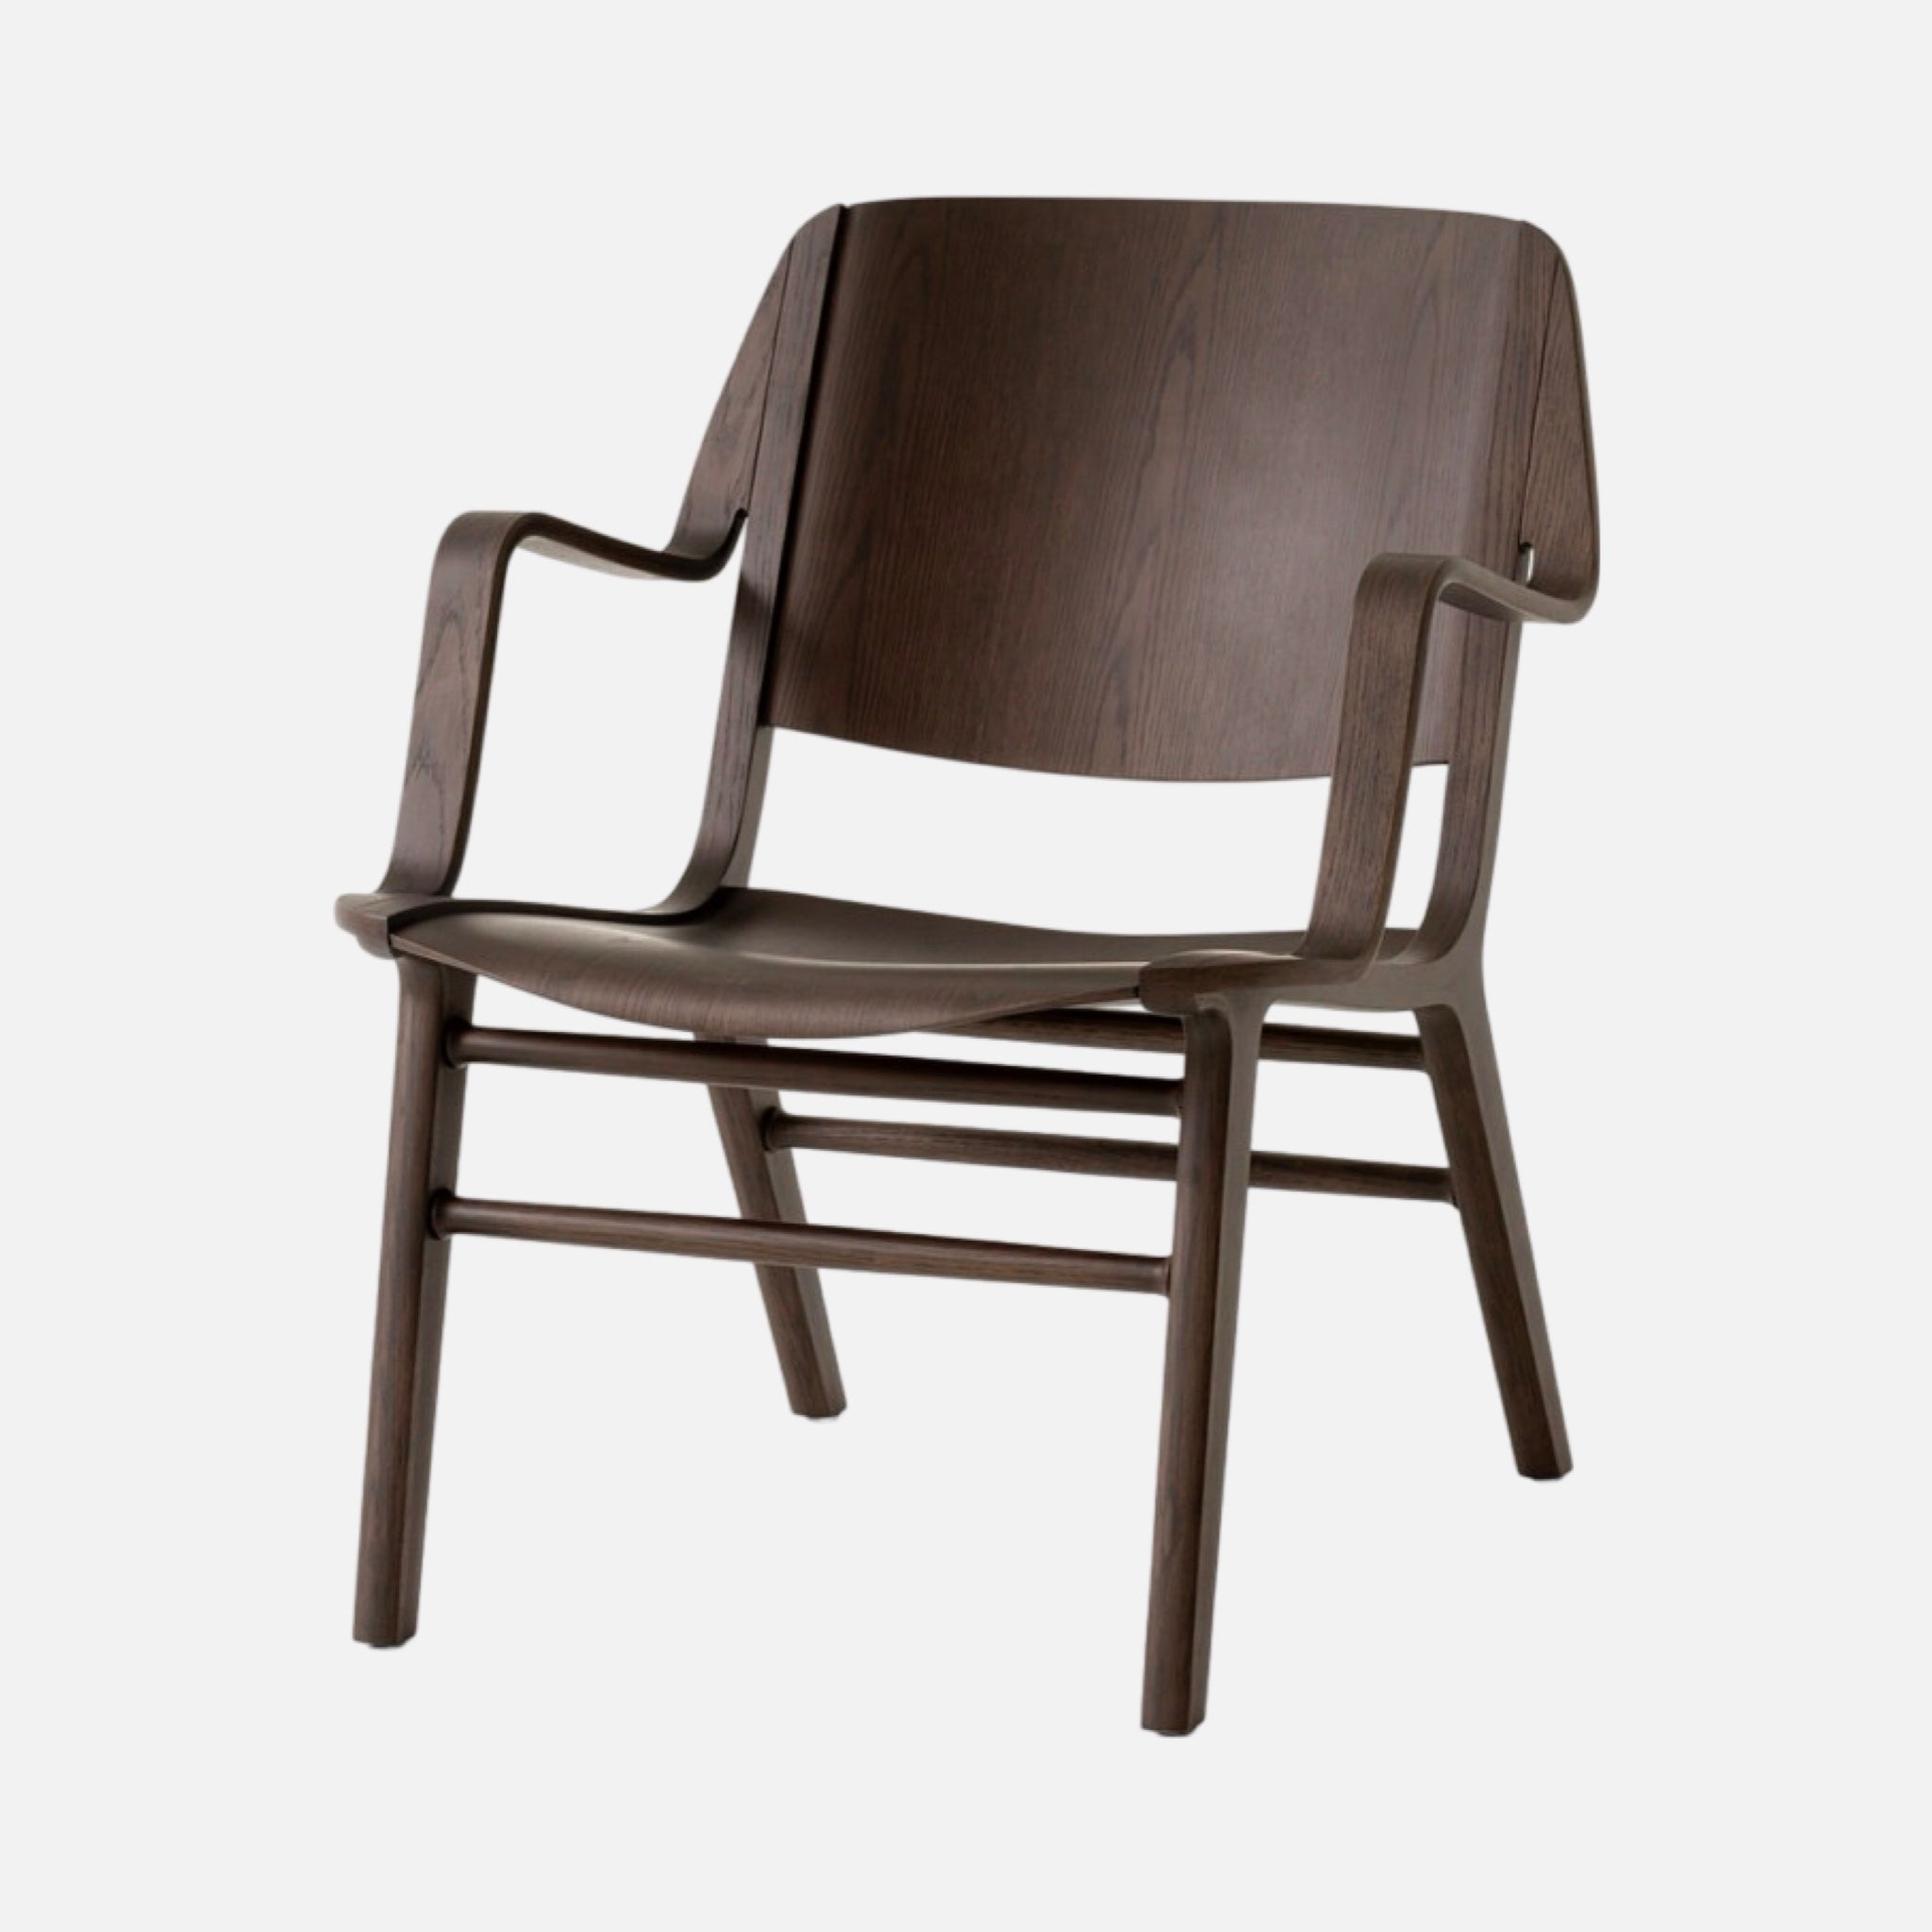 &Tradition AX Lounge Chair HM11